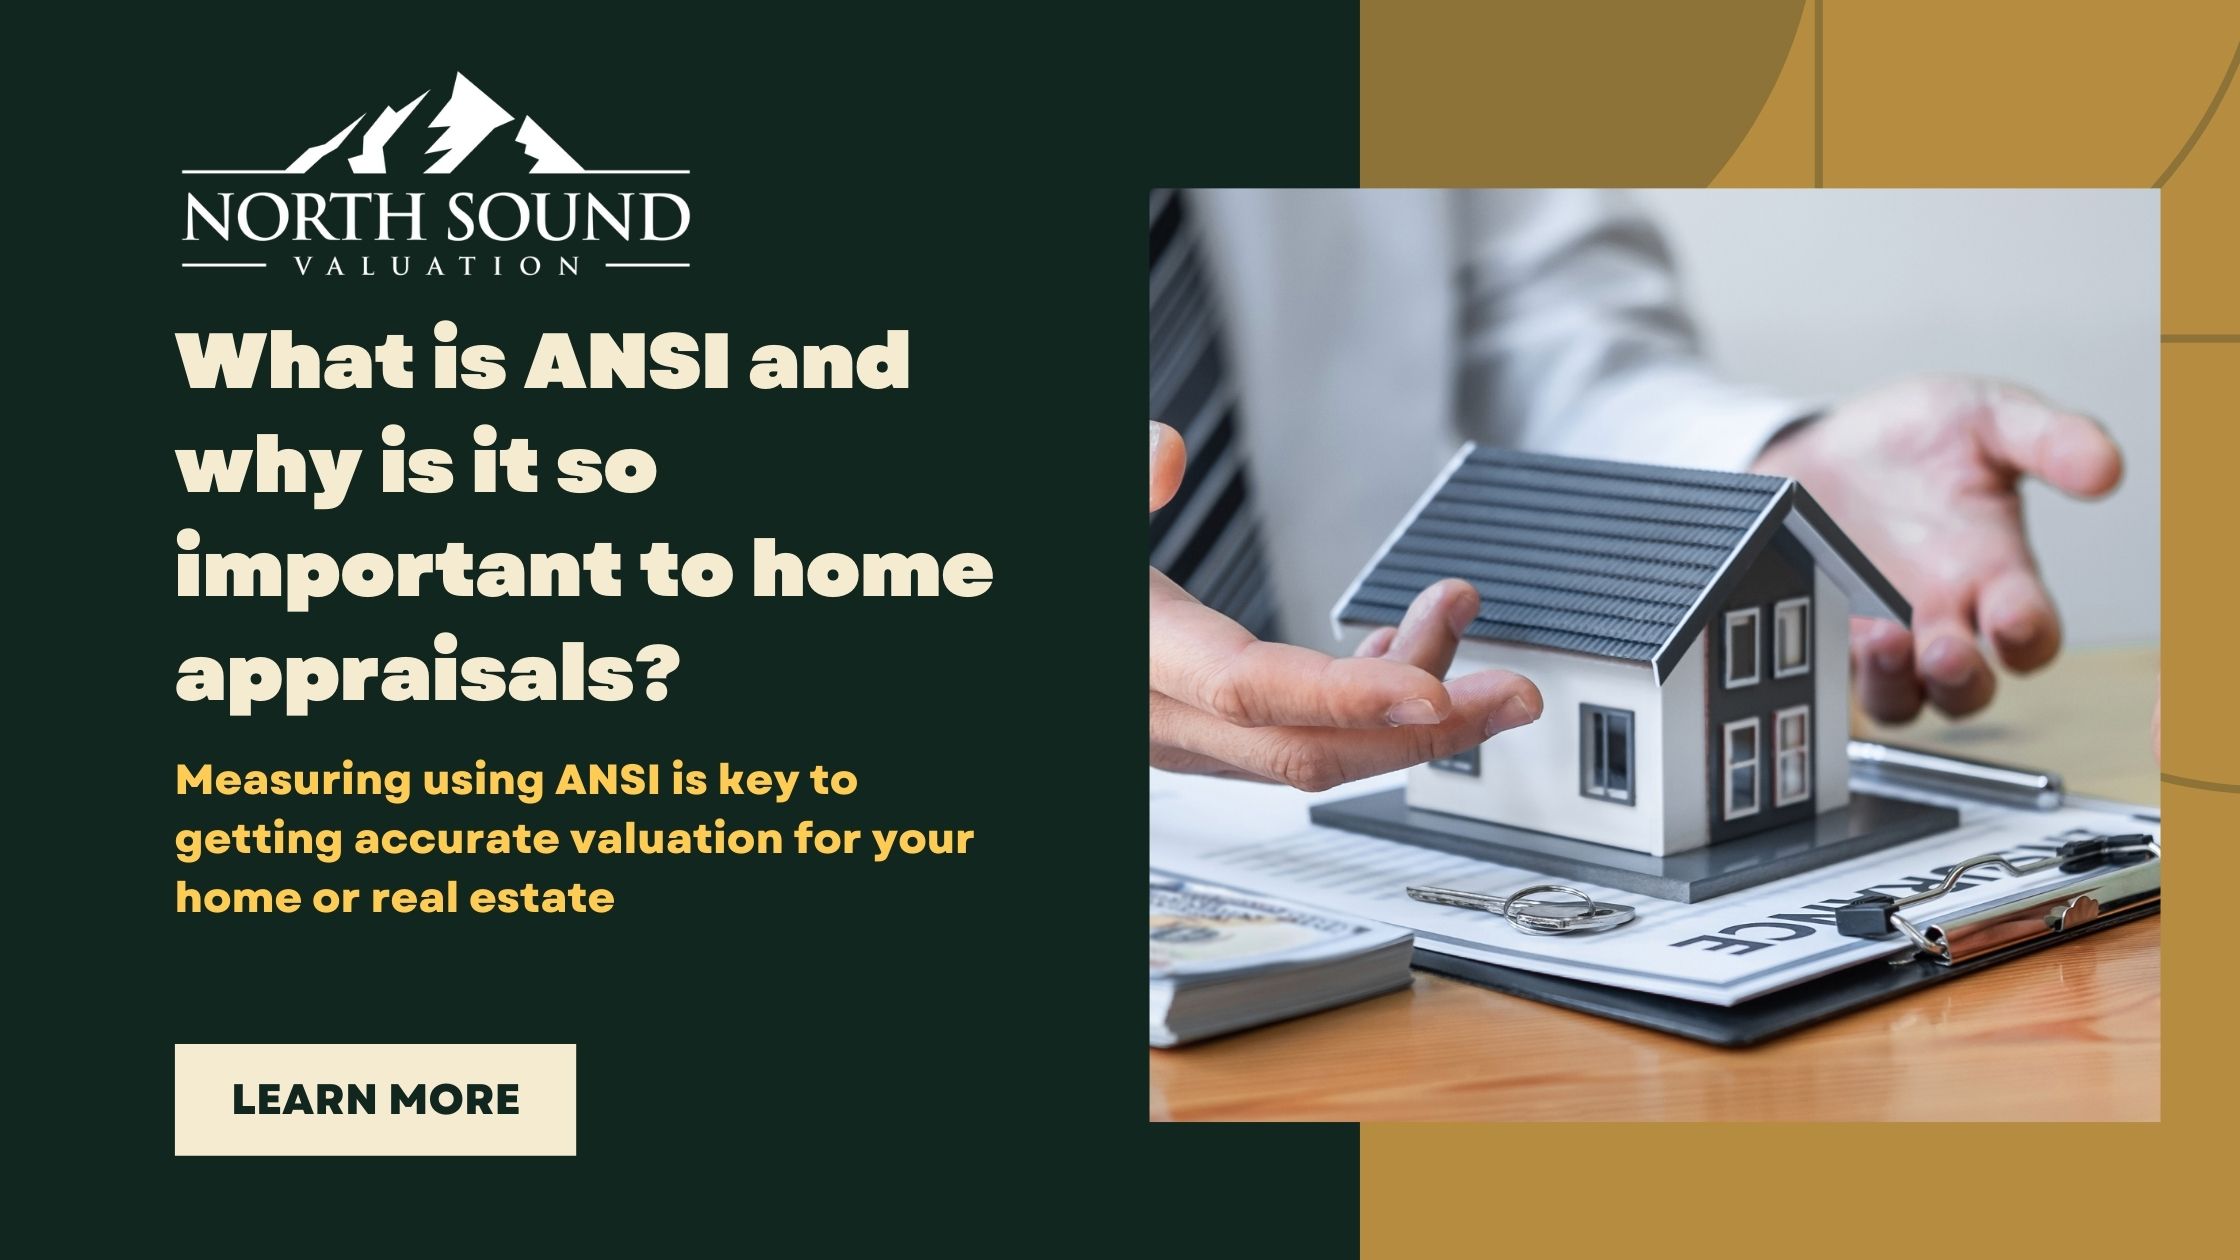 What is ANSI and why is it so important to home appraisals?